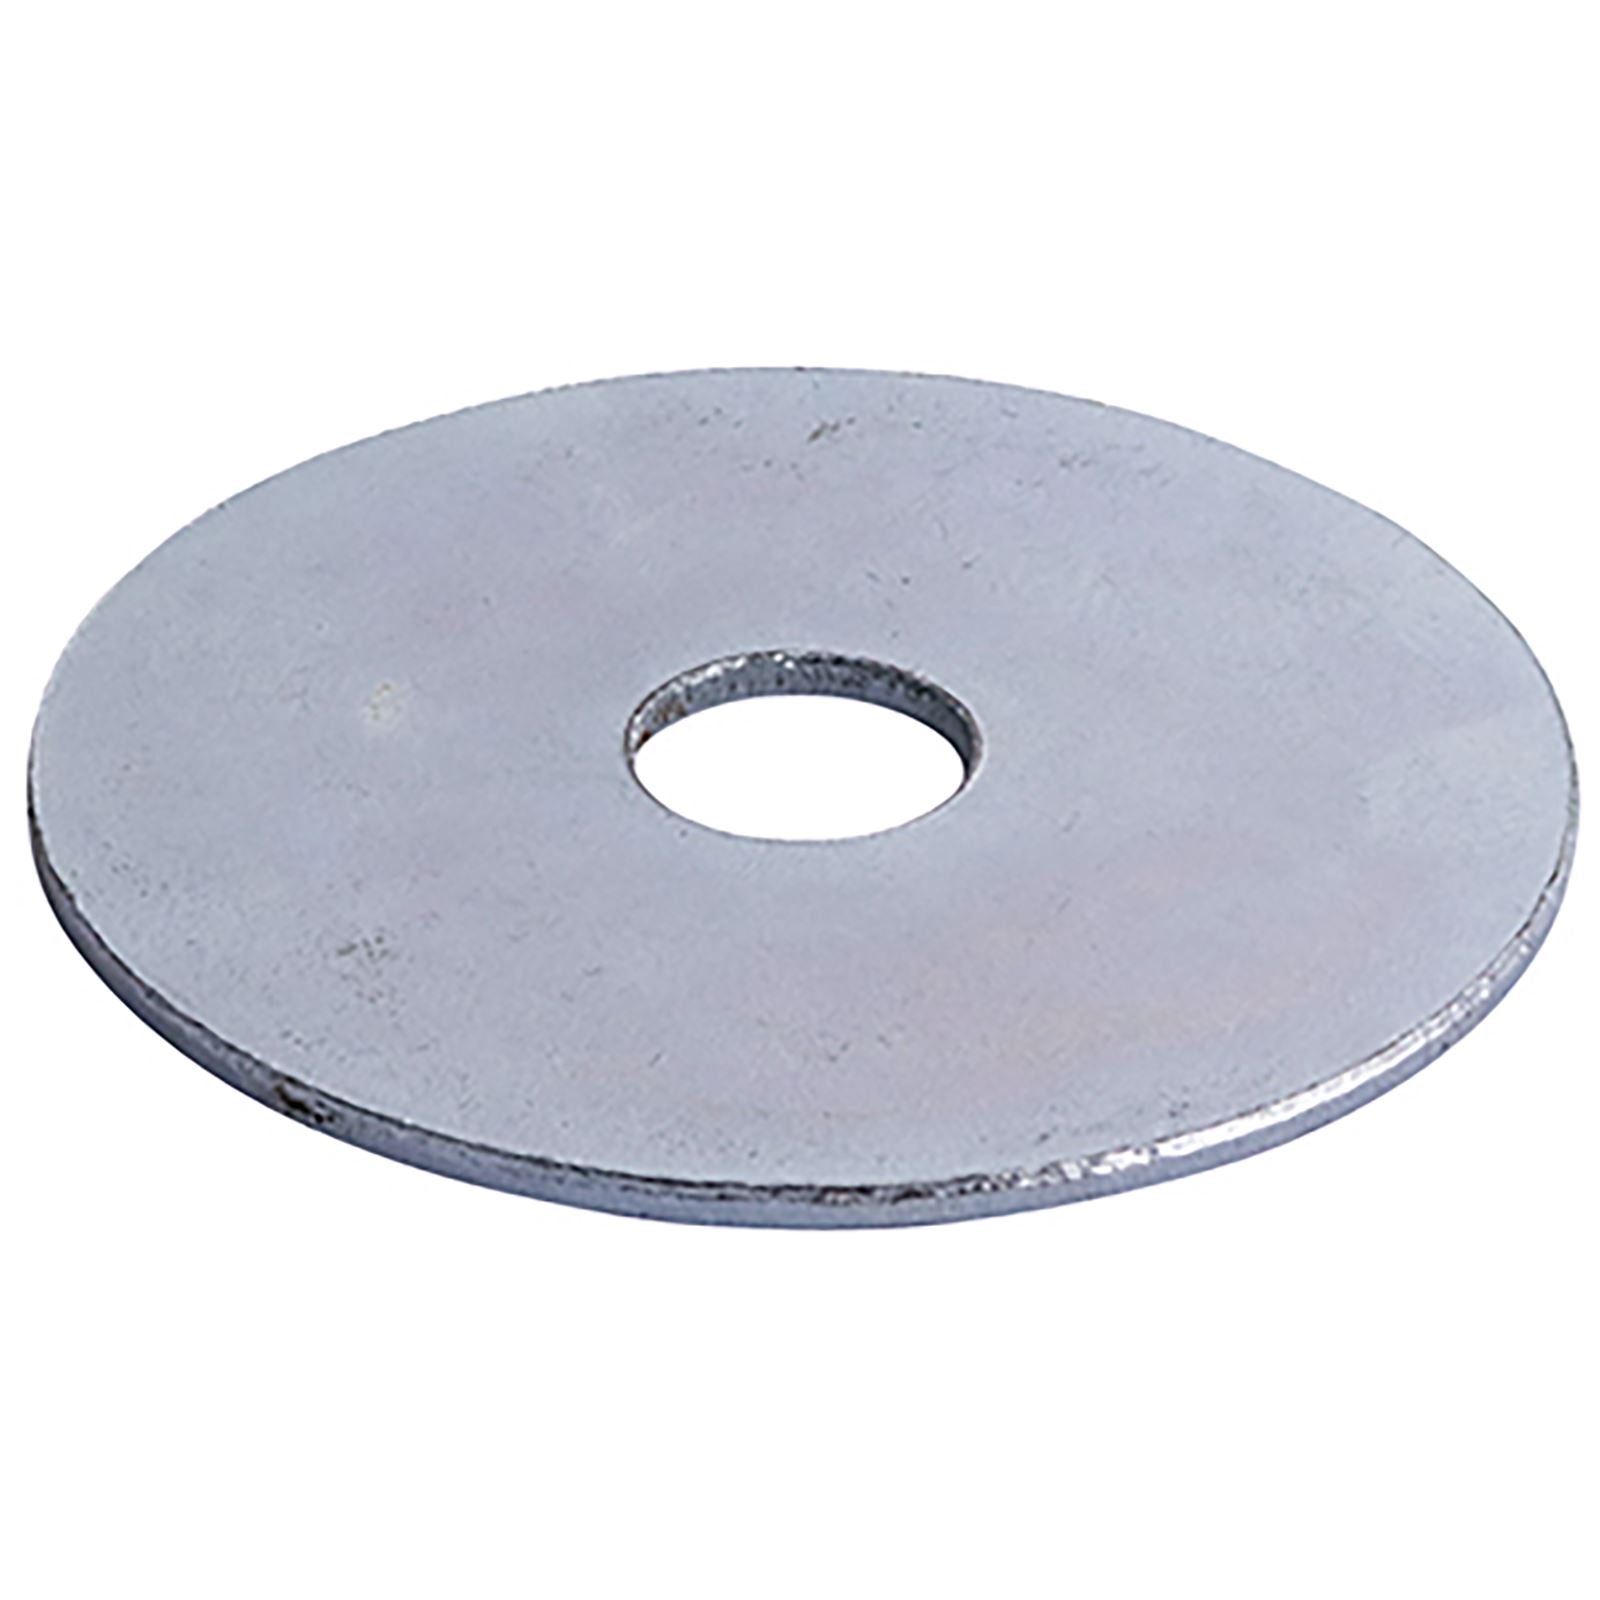 TIMCO Penny Repair Washers Zinc DIN 9054 M5 - M12 Choose Size